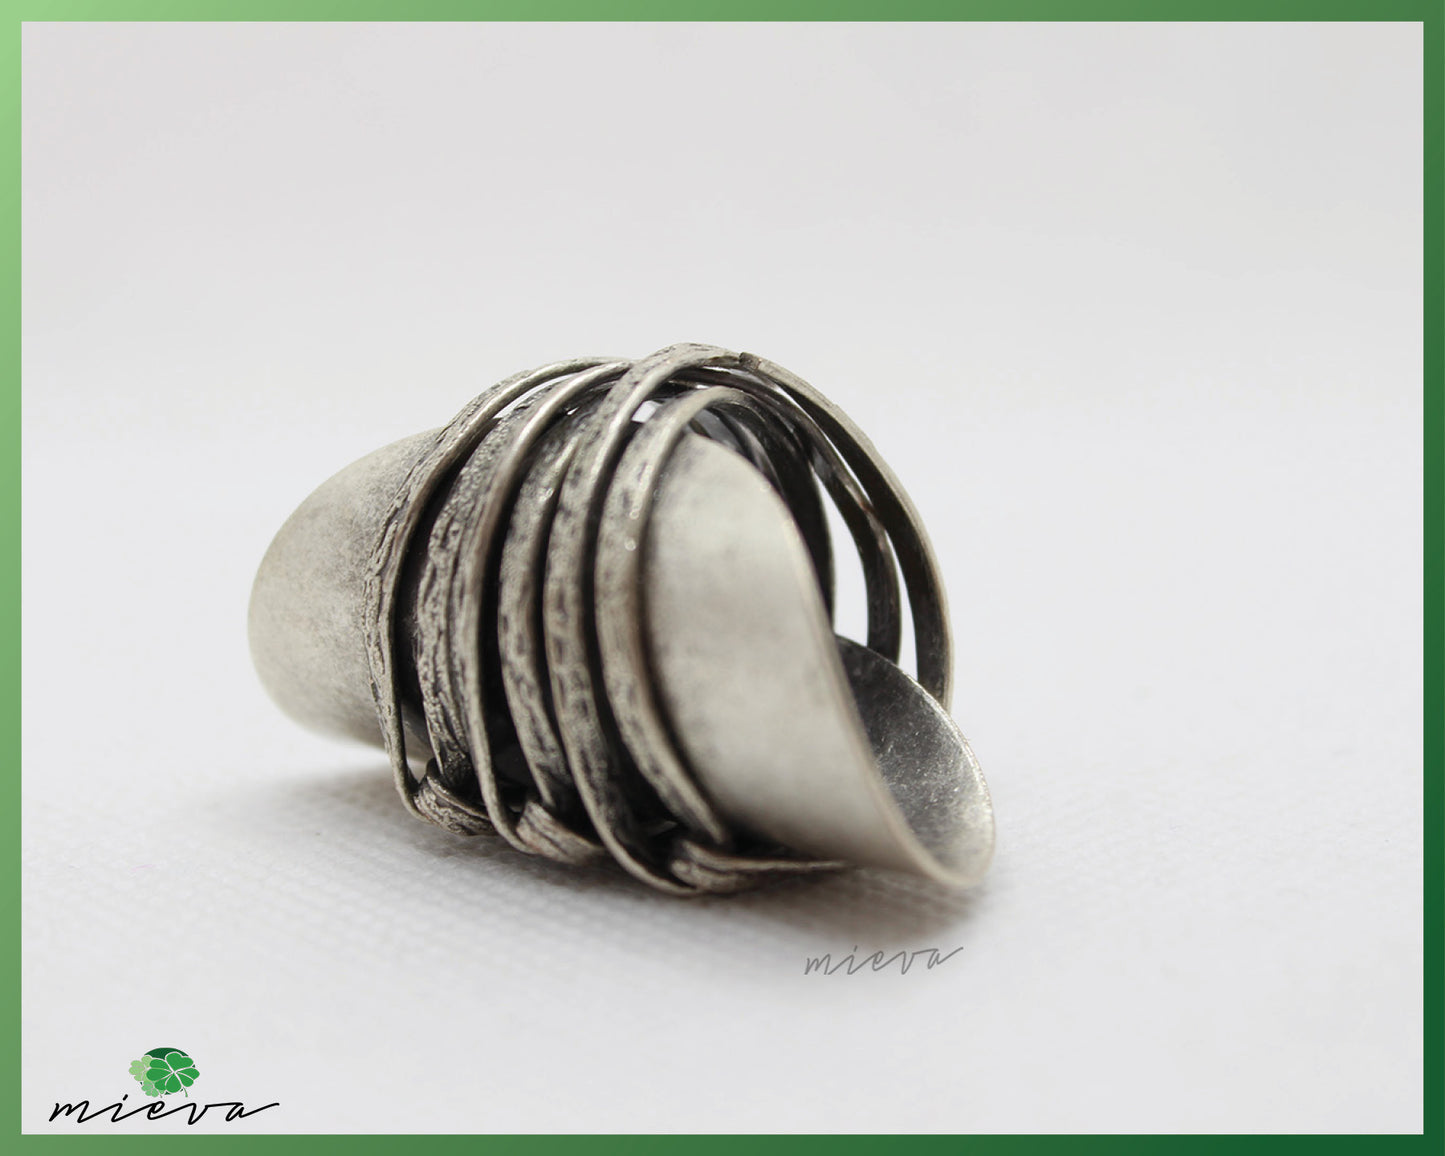 Textured Multi-Band Wrap Silver Ring